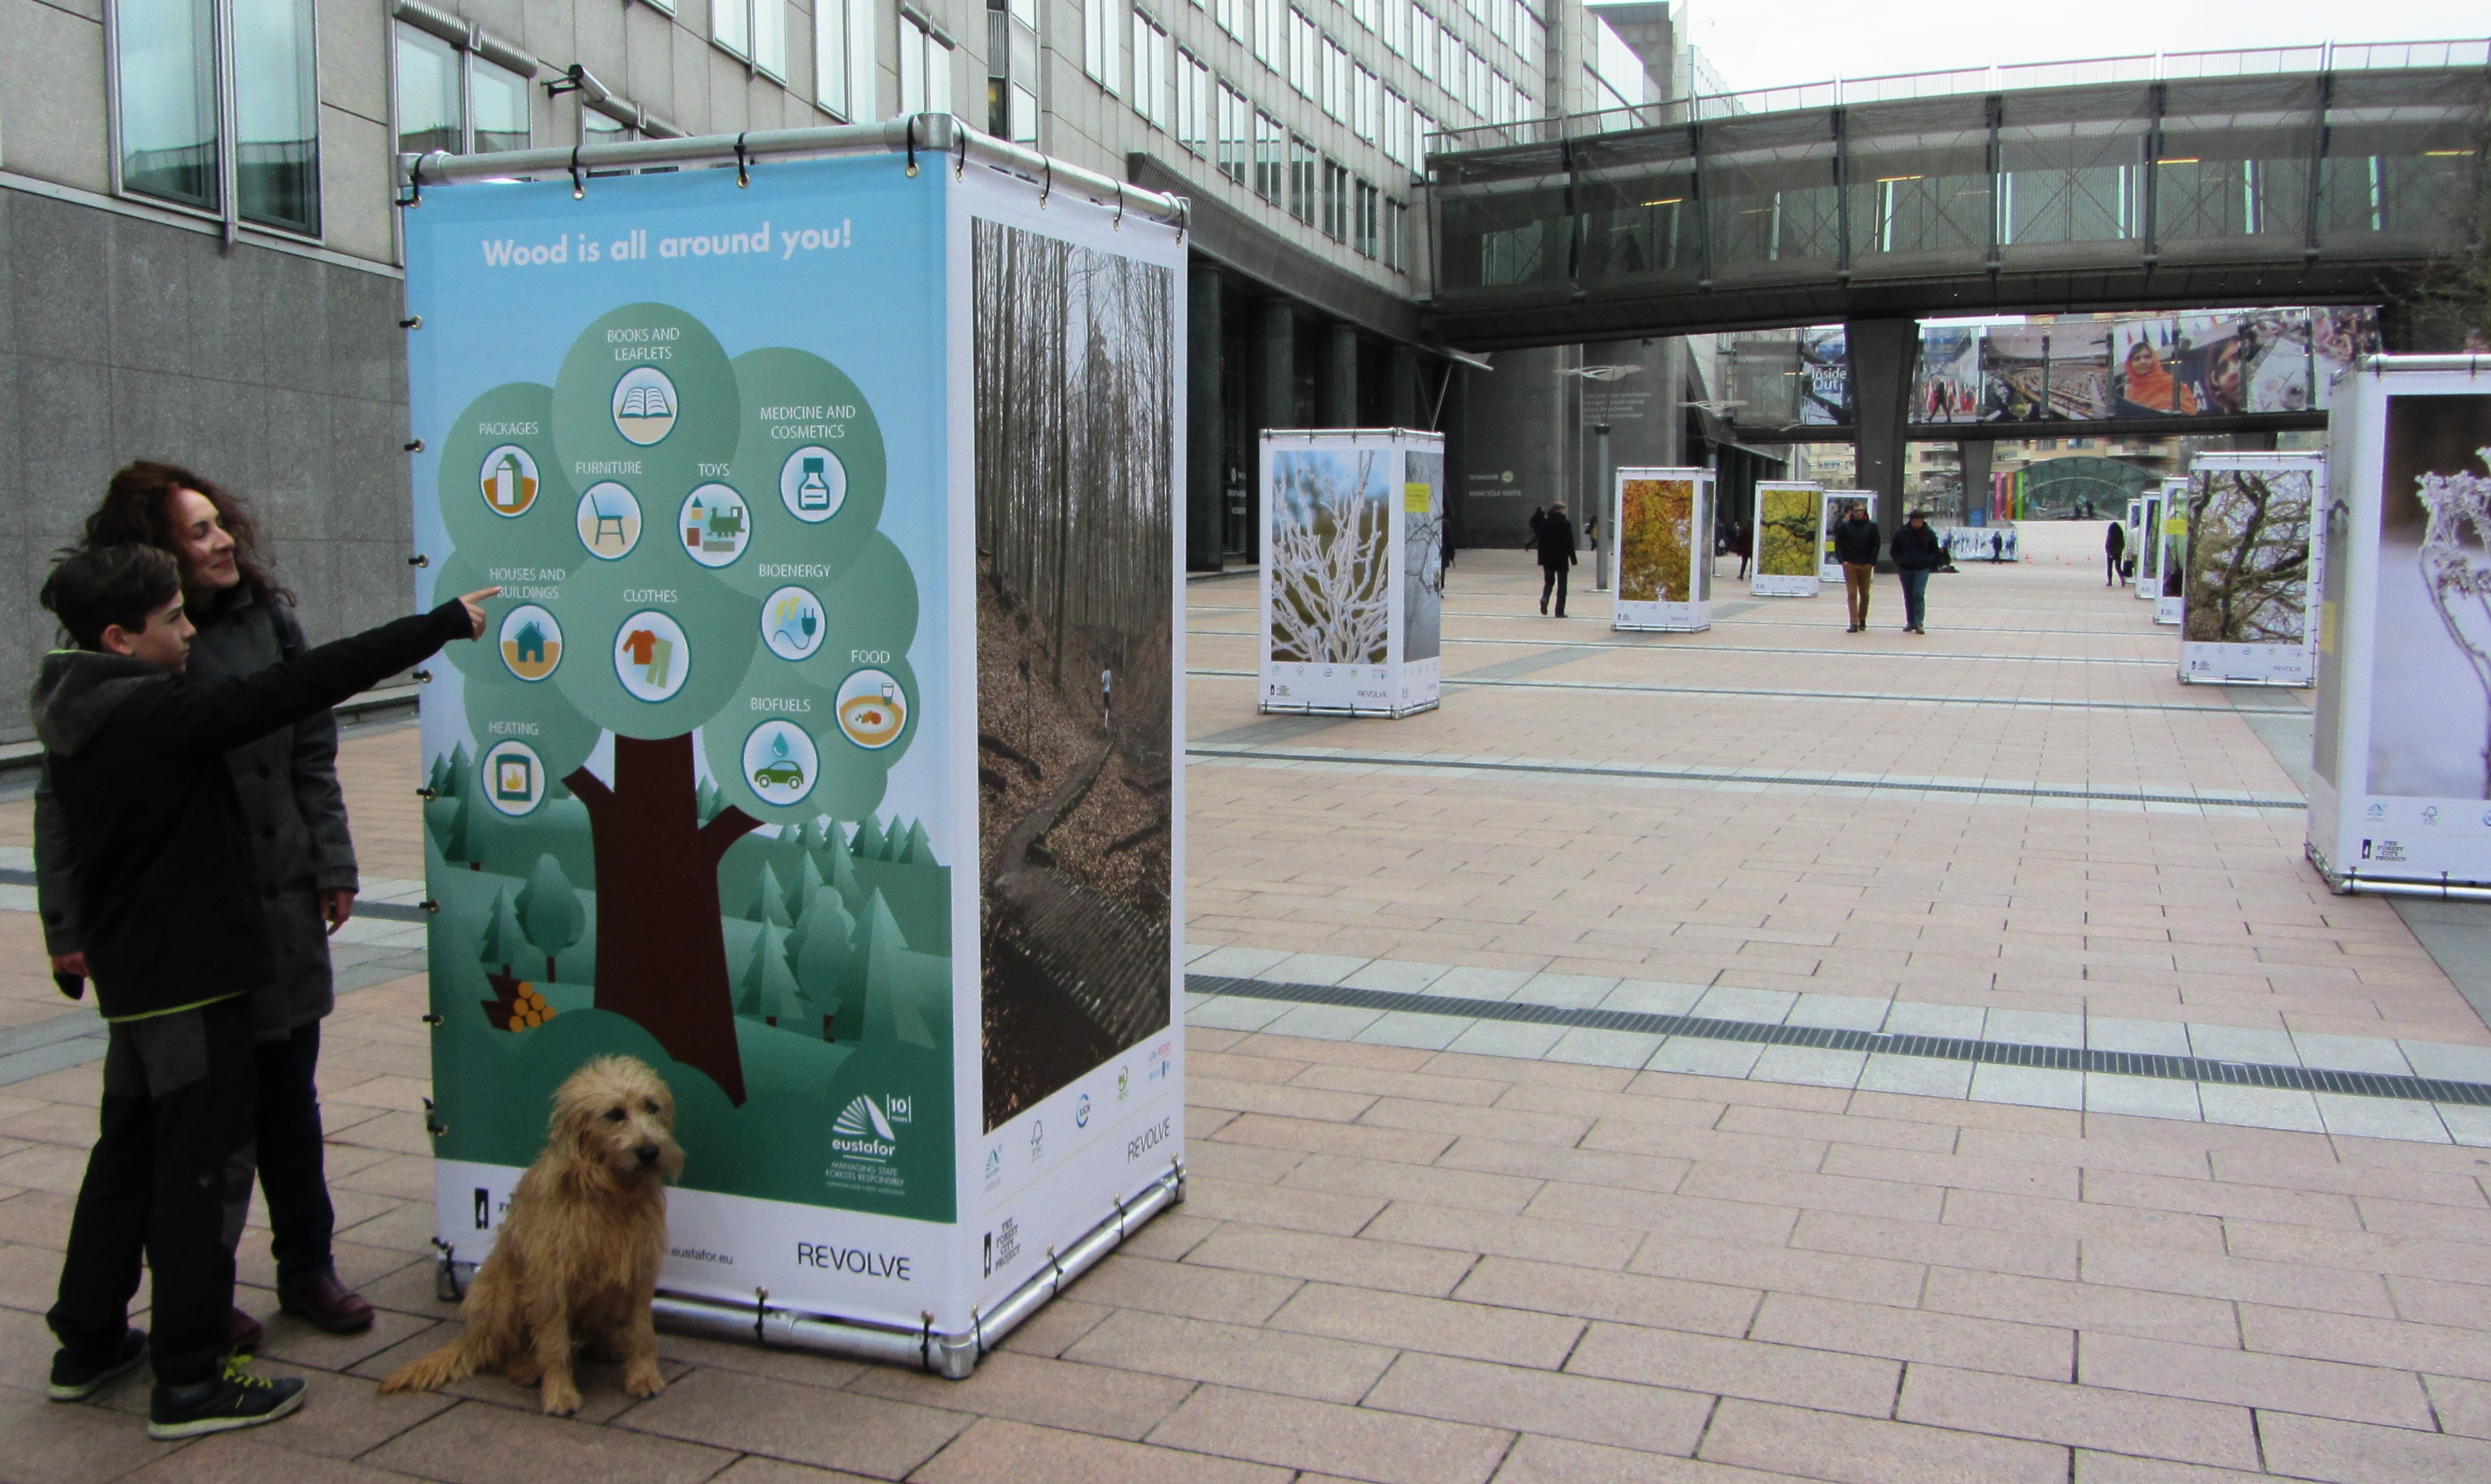 10 cubes showing large forest Posters infront of the European Parliament